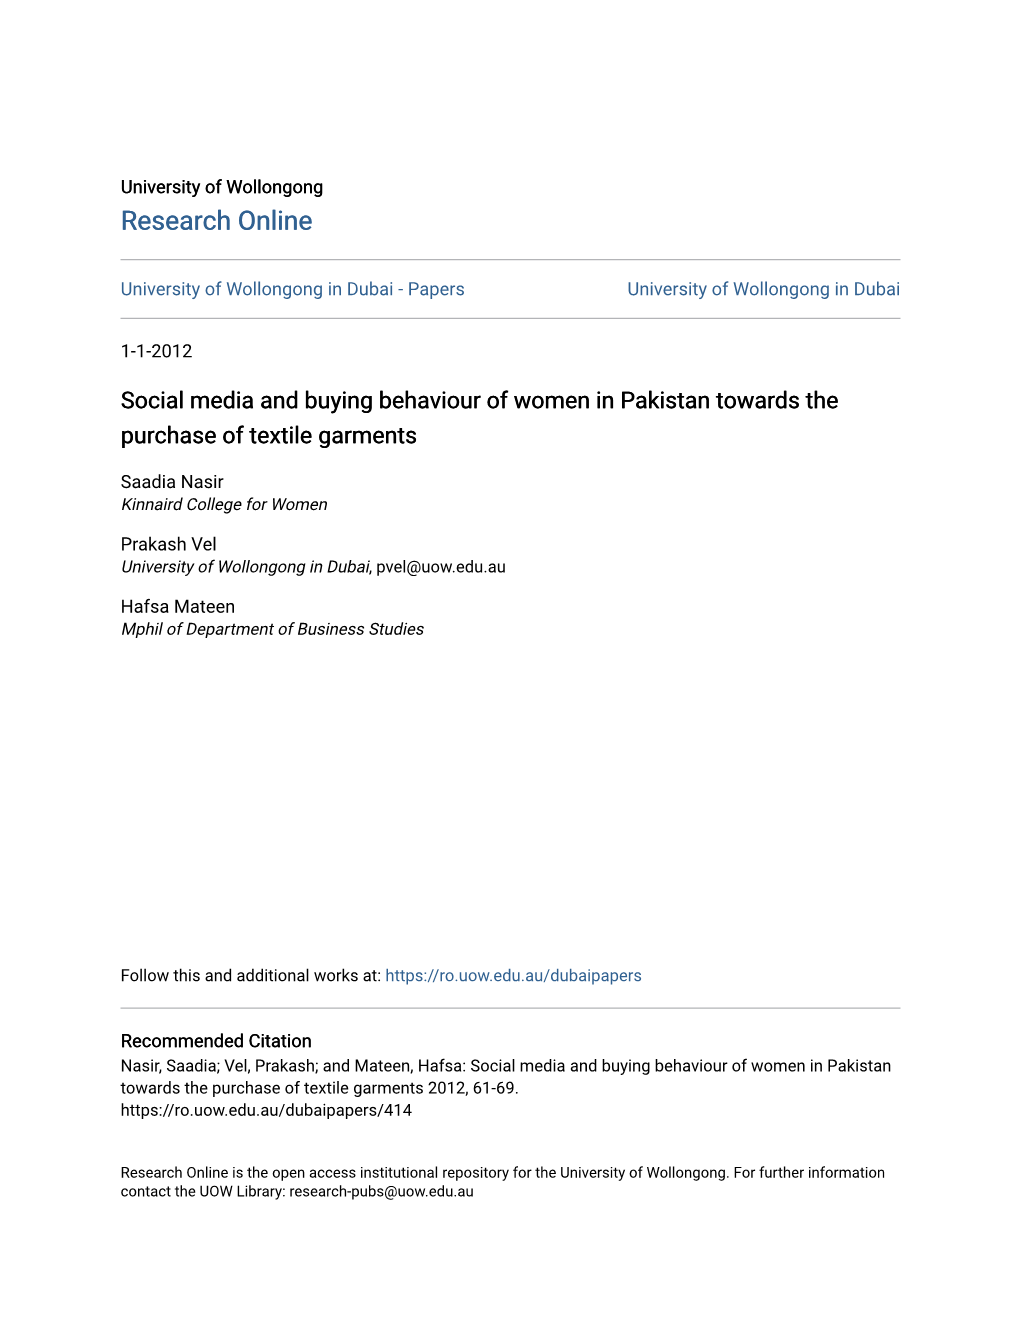 Social Media and Buying Behaviour of Women in Pakistan Towards the Purchase of Textile Garments